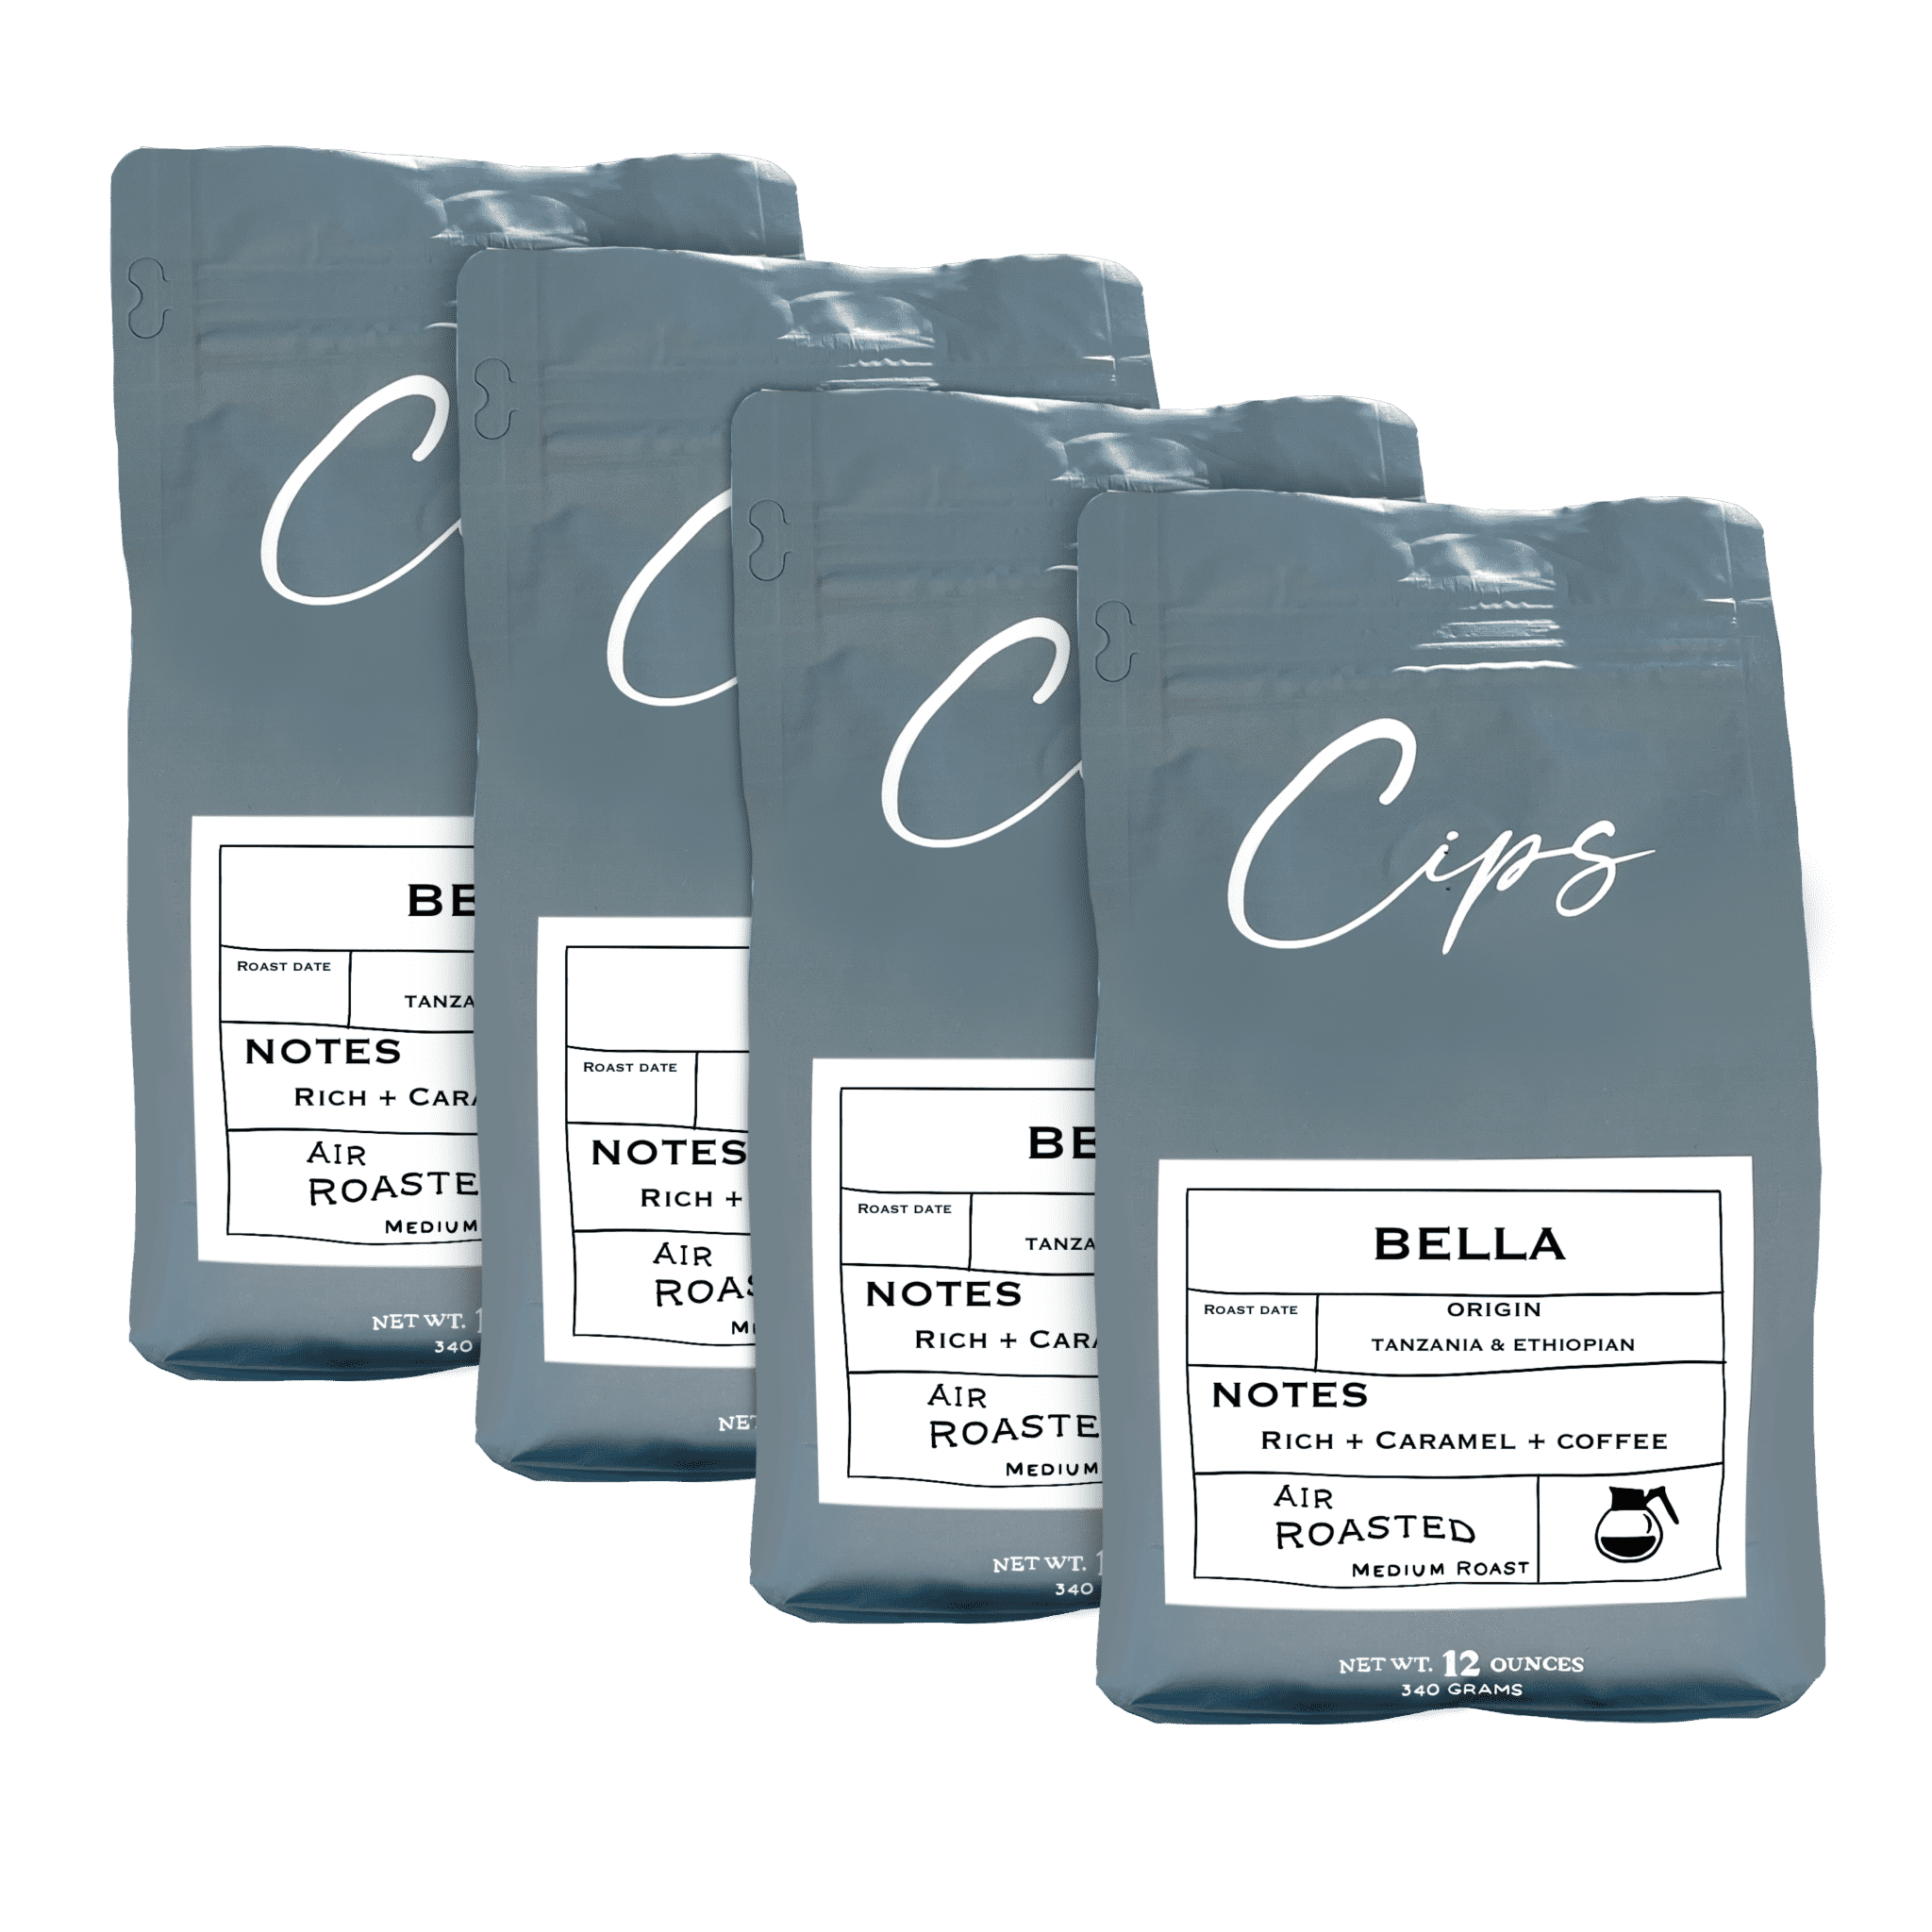 Cips Coffee Selections